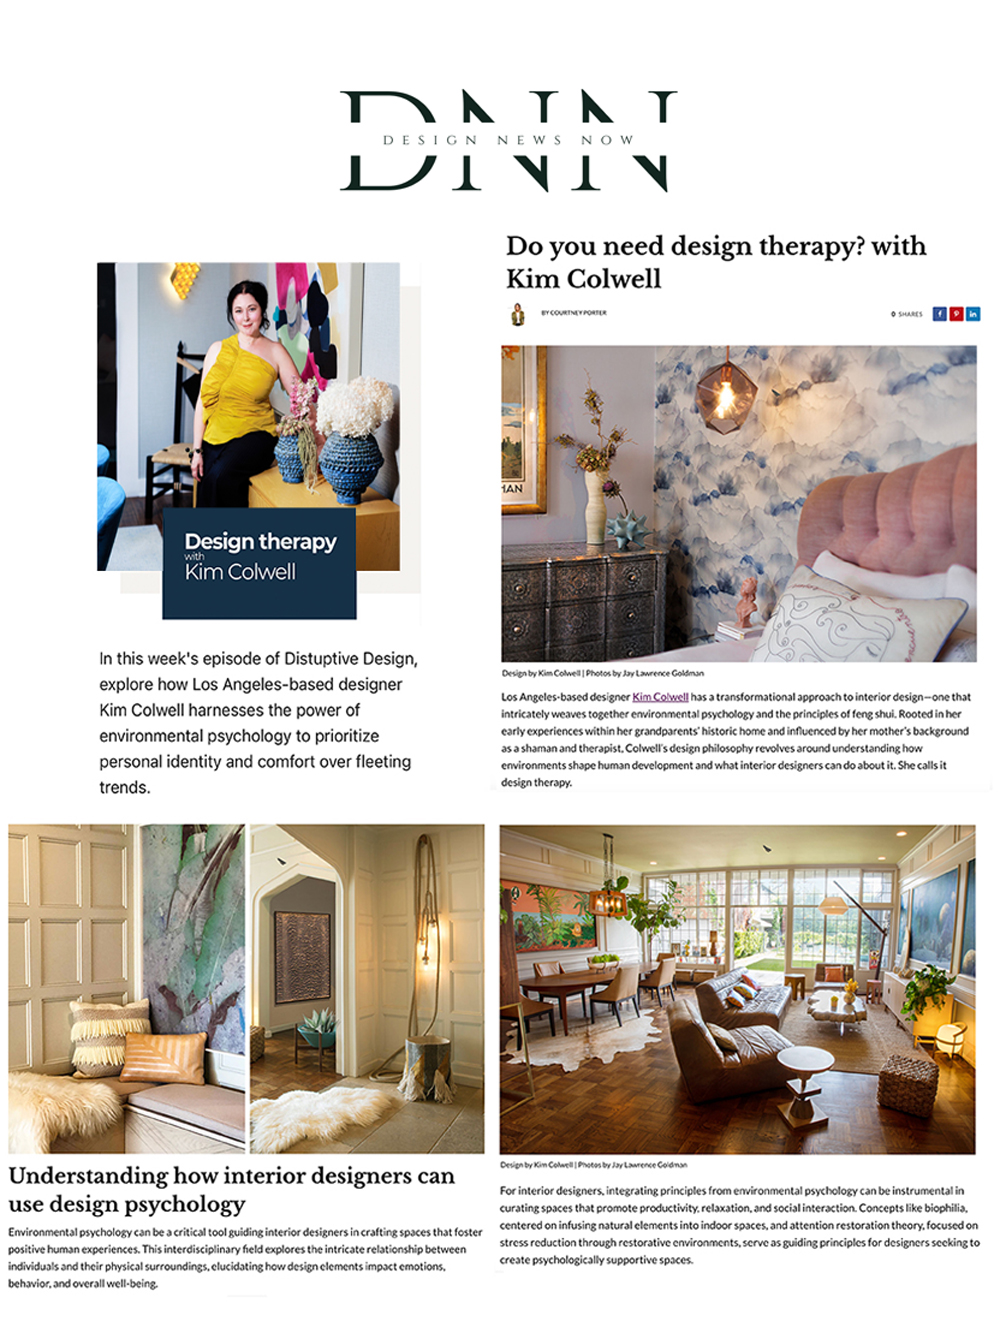 Design News Now interview with Kim Colwell and editor in chief Courtney Porter. 